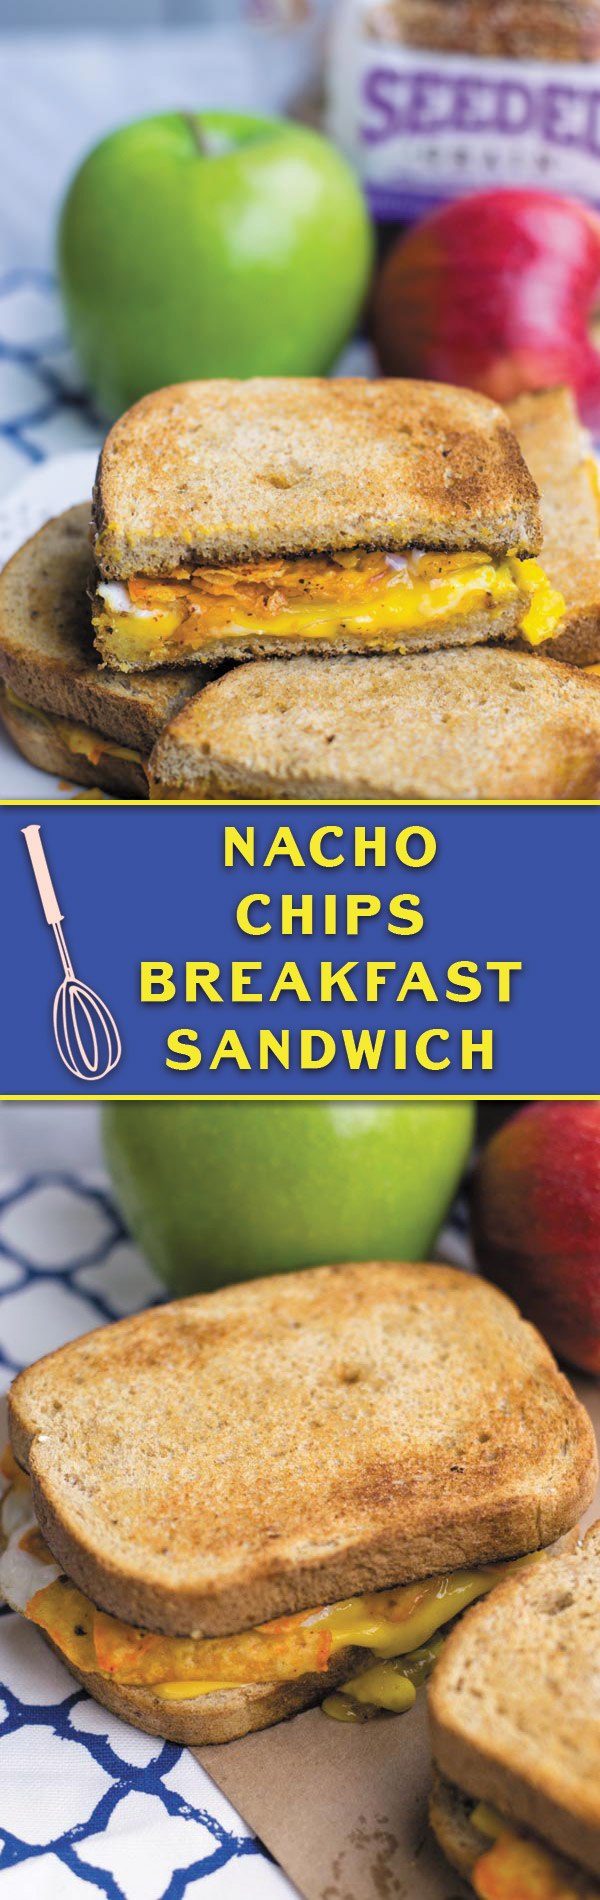 Nacho Chips Breakfast Sandwich - Simple 4 Ingredient breakfast sandwich, nacho chips make simple egg & cheese sandwich hard to resist! These are so POPULAR at my place!